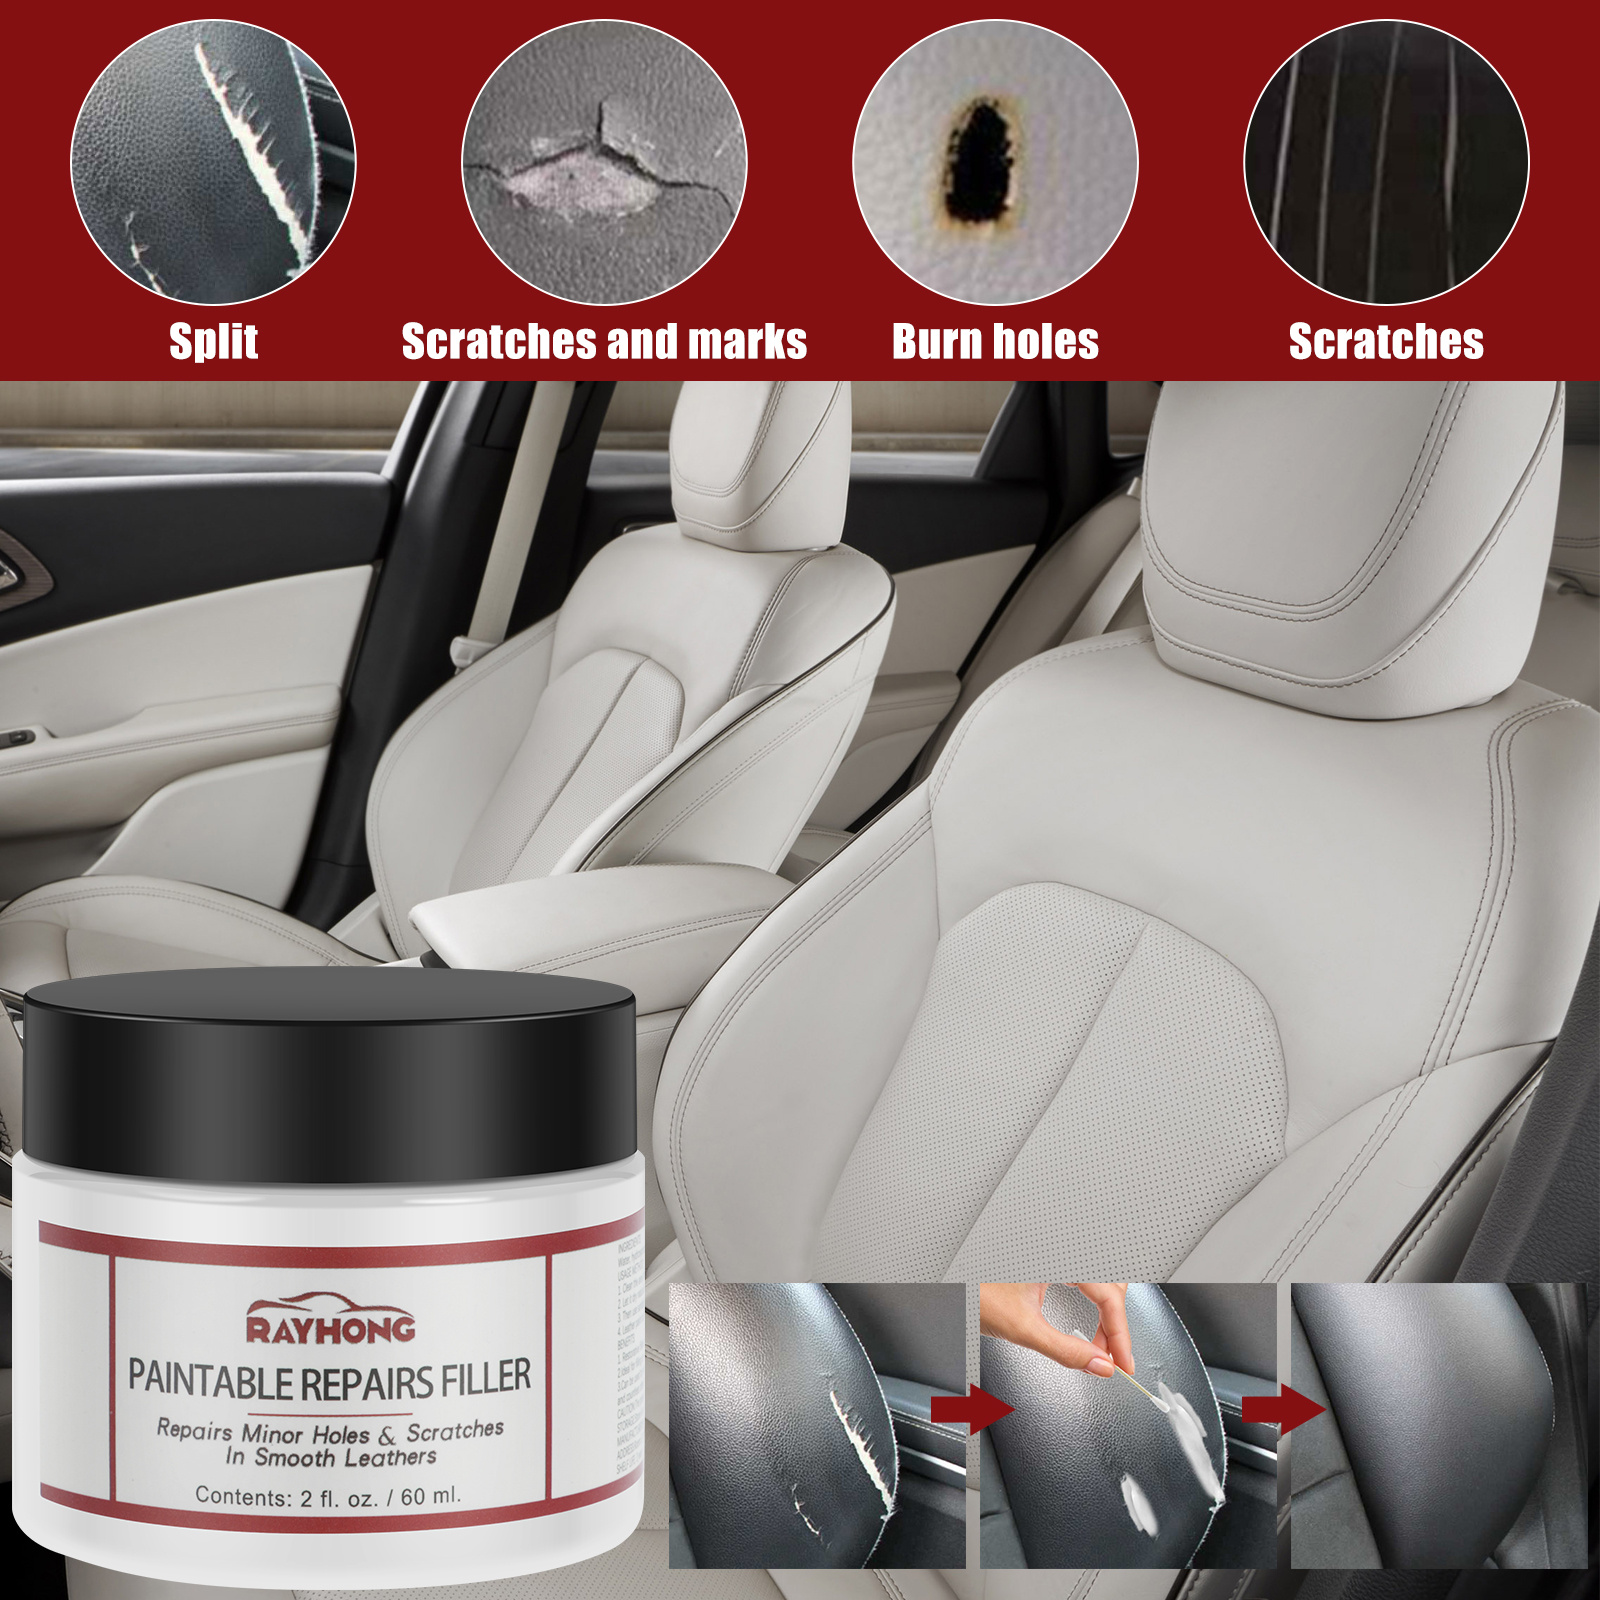 SEAT Leather Repair Kit for tears holes scuffs and colour dye damage